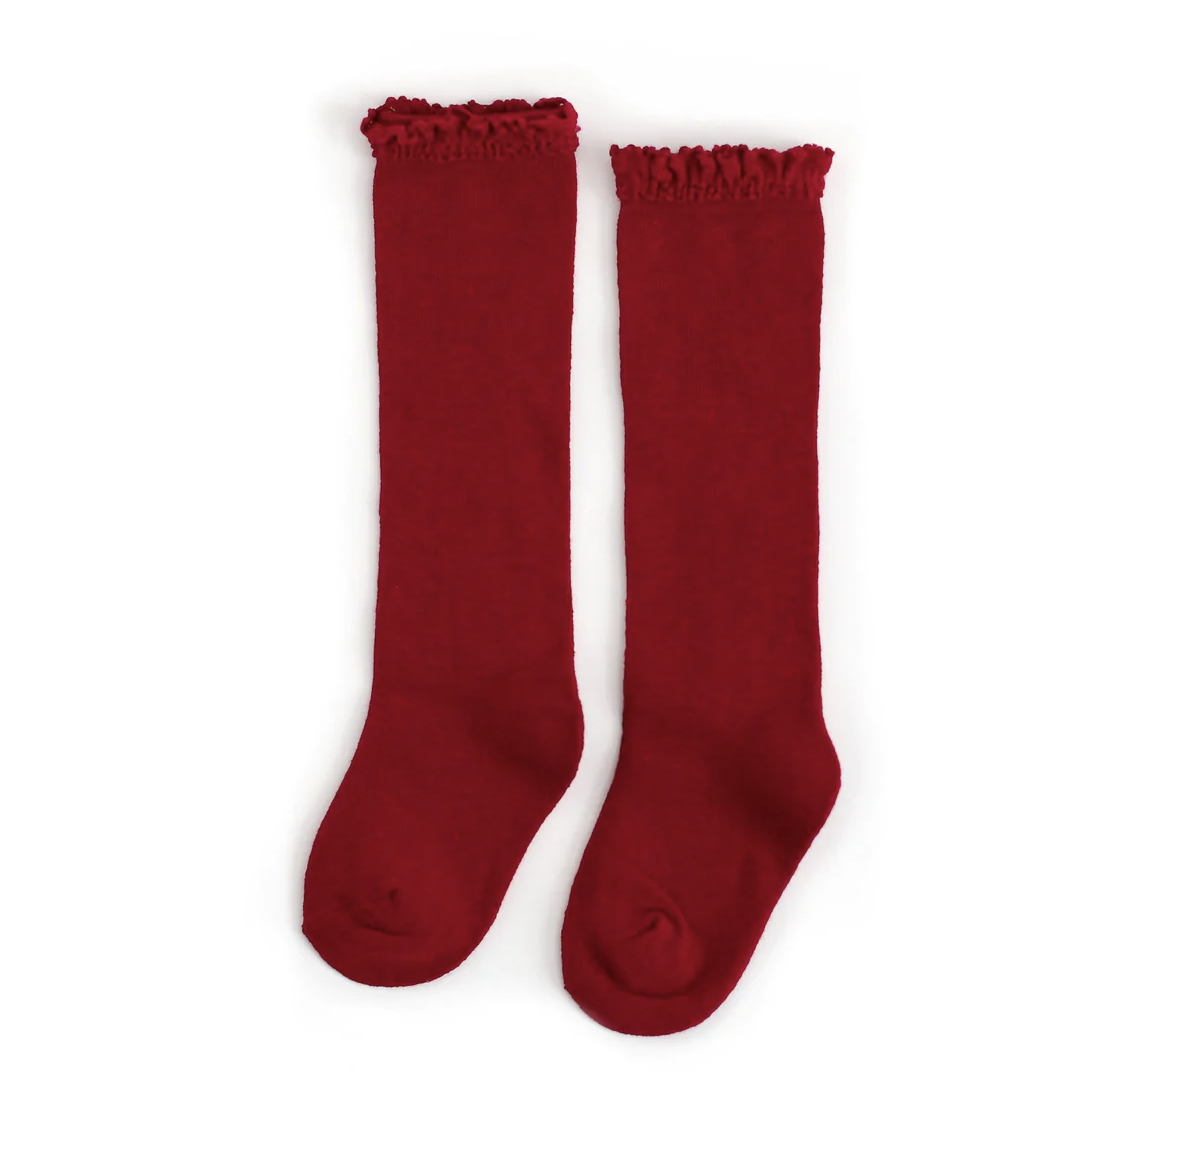 Little Stocking Co. Lace Top Knee High Socks- Cherry Red